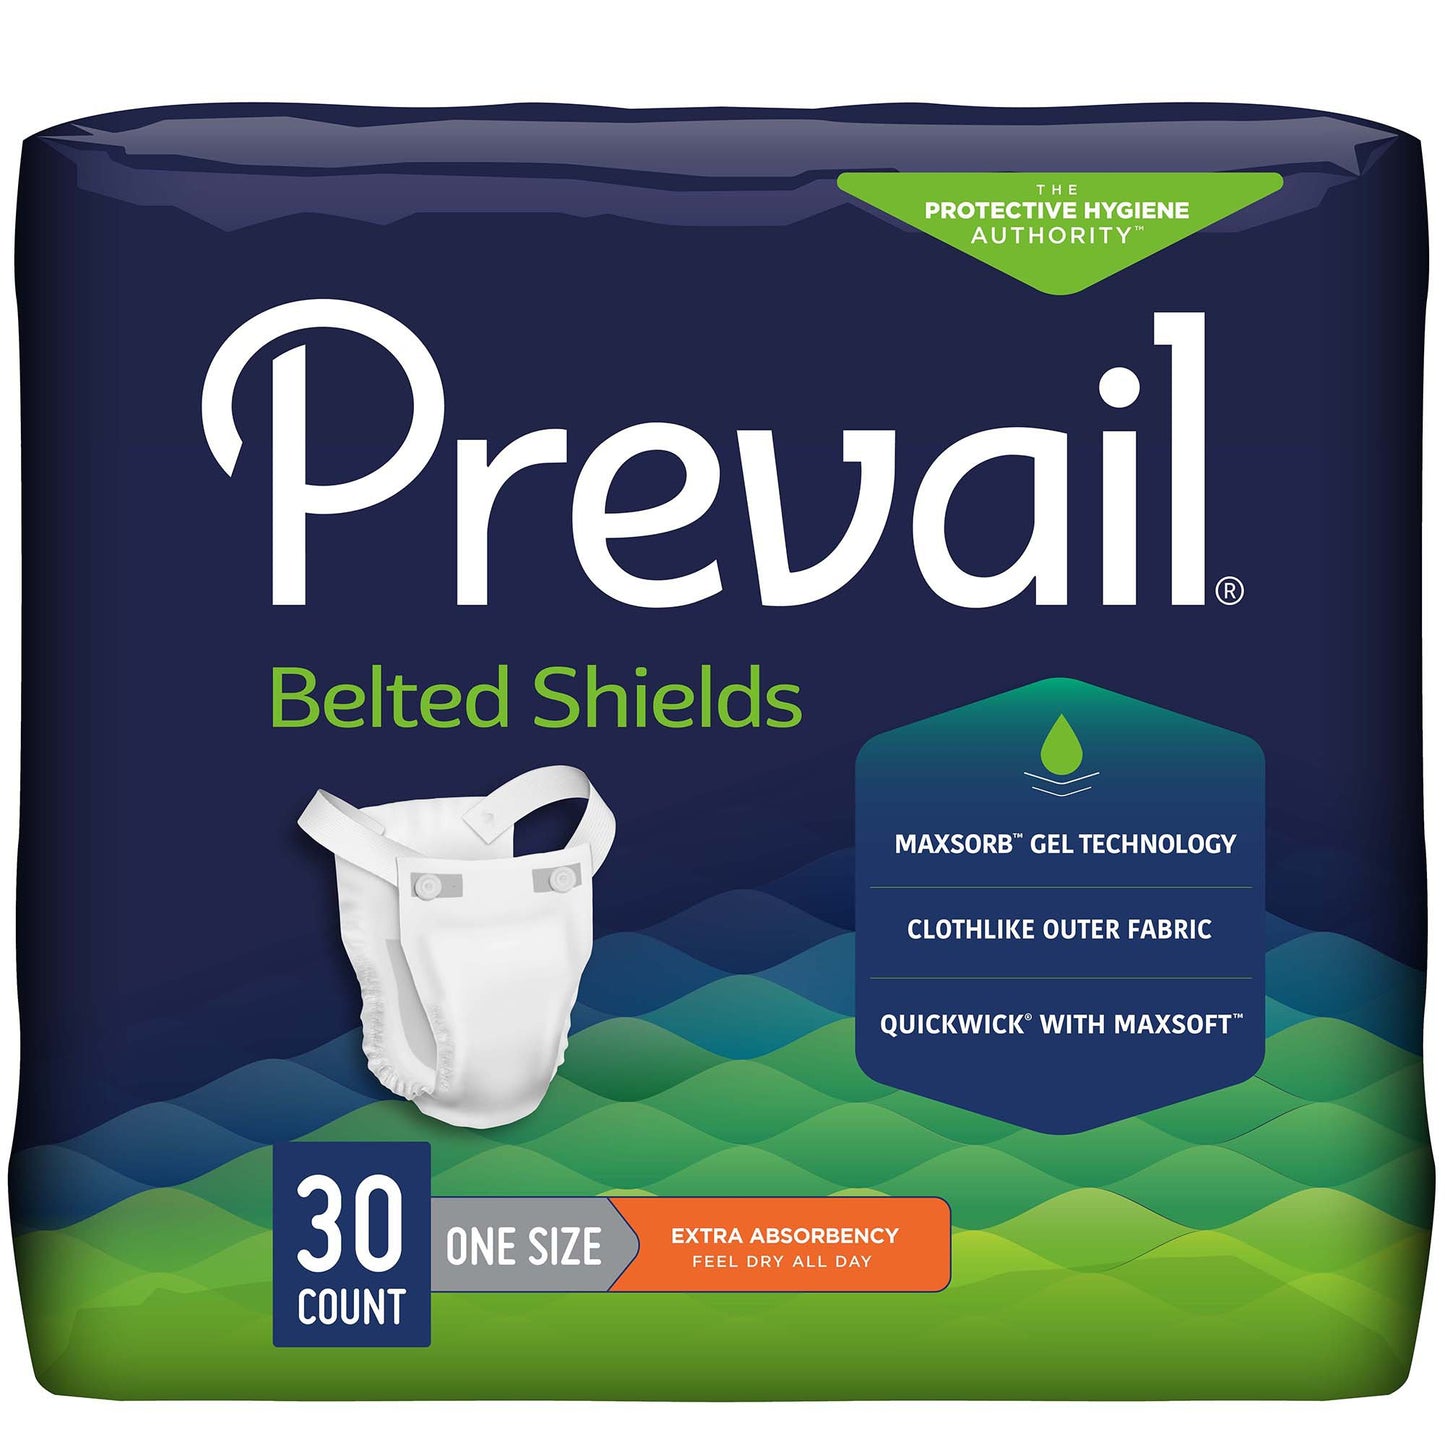 Prevail® Belted Shields Extra Incontinence Belted Undergarment, One Size Fits Most, 30 ct